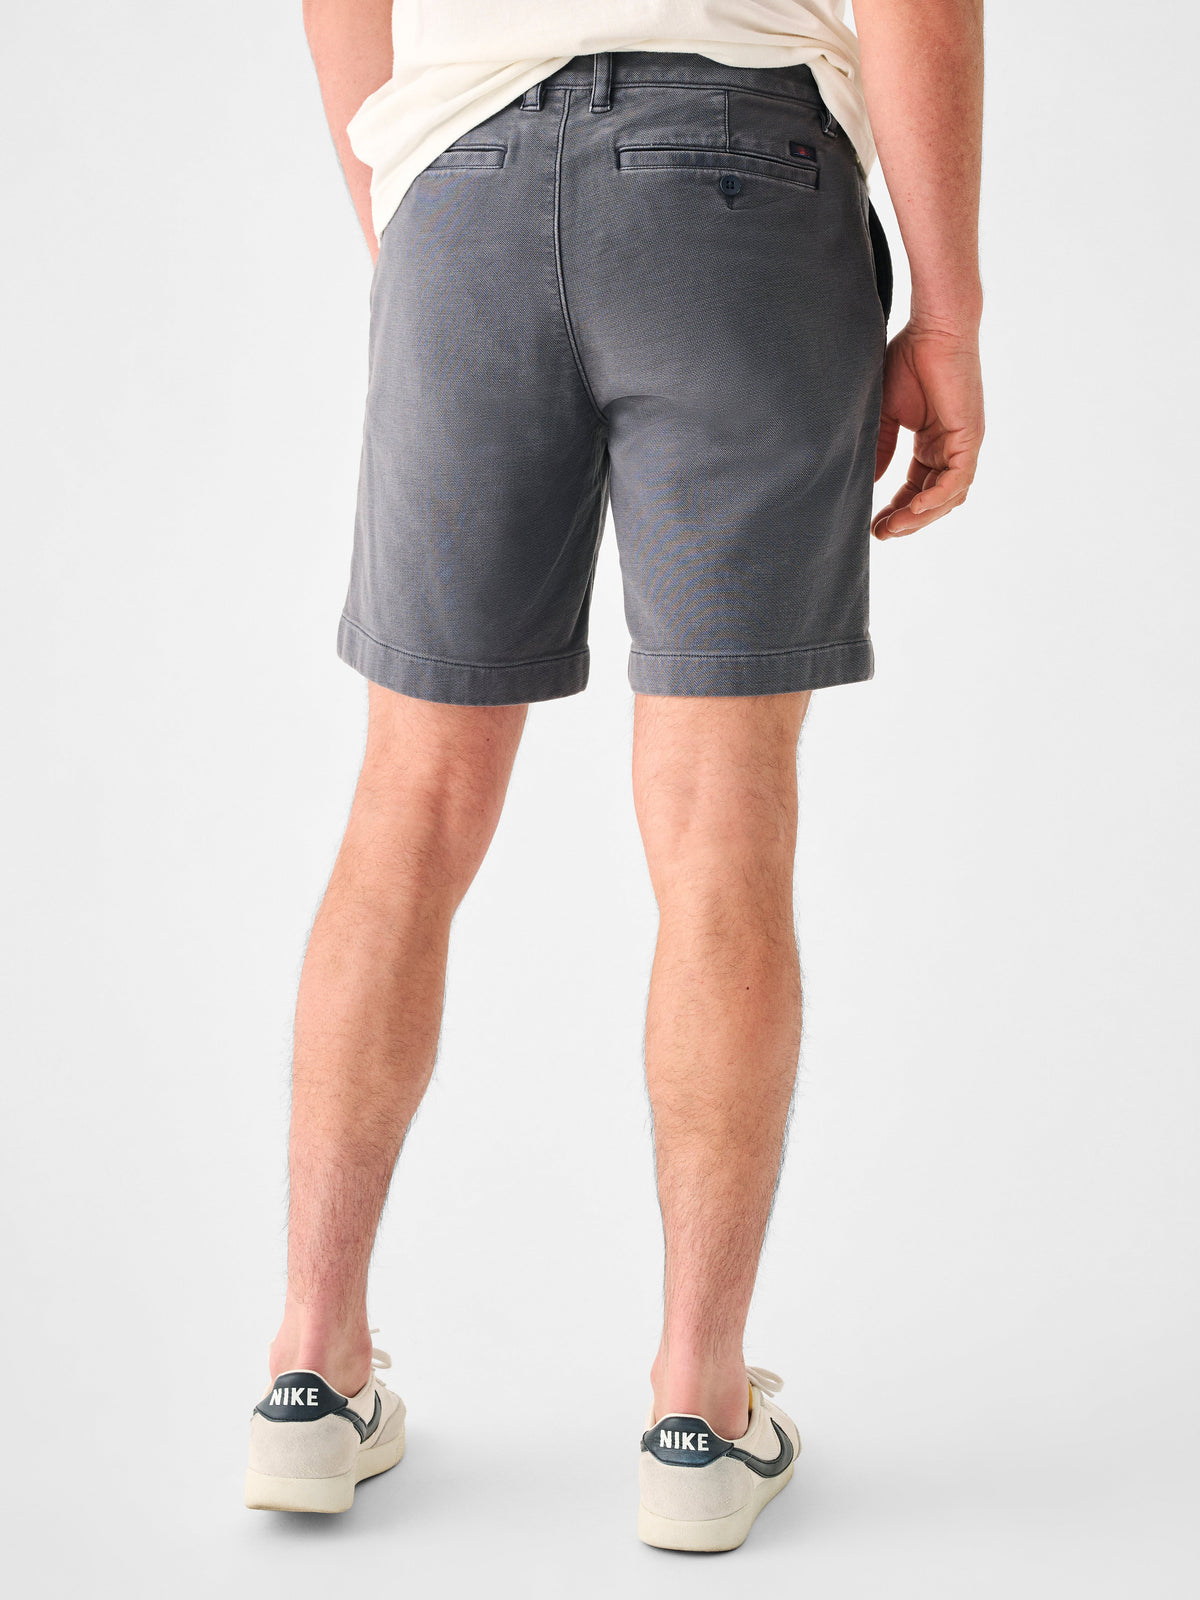 Stretch Terry Short 7.5" - Unlined